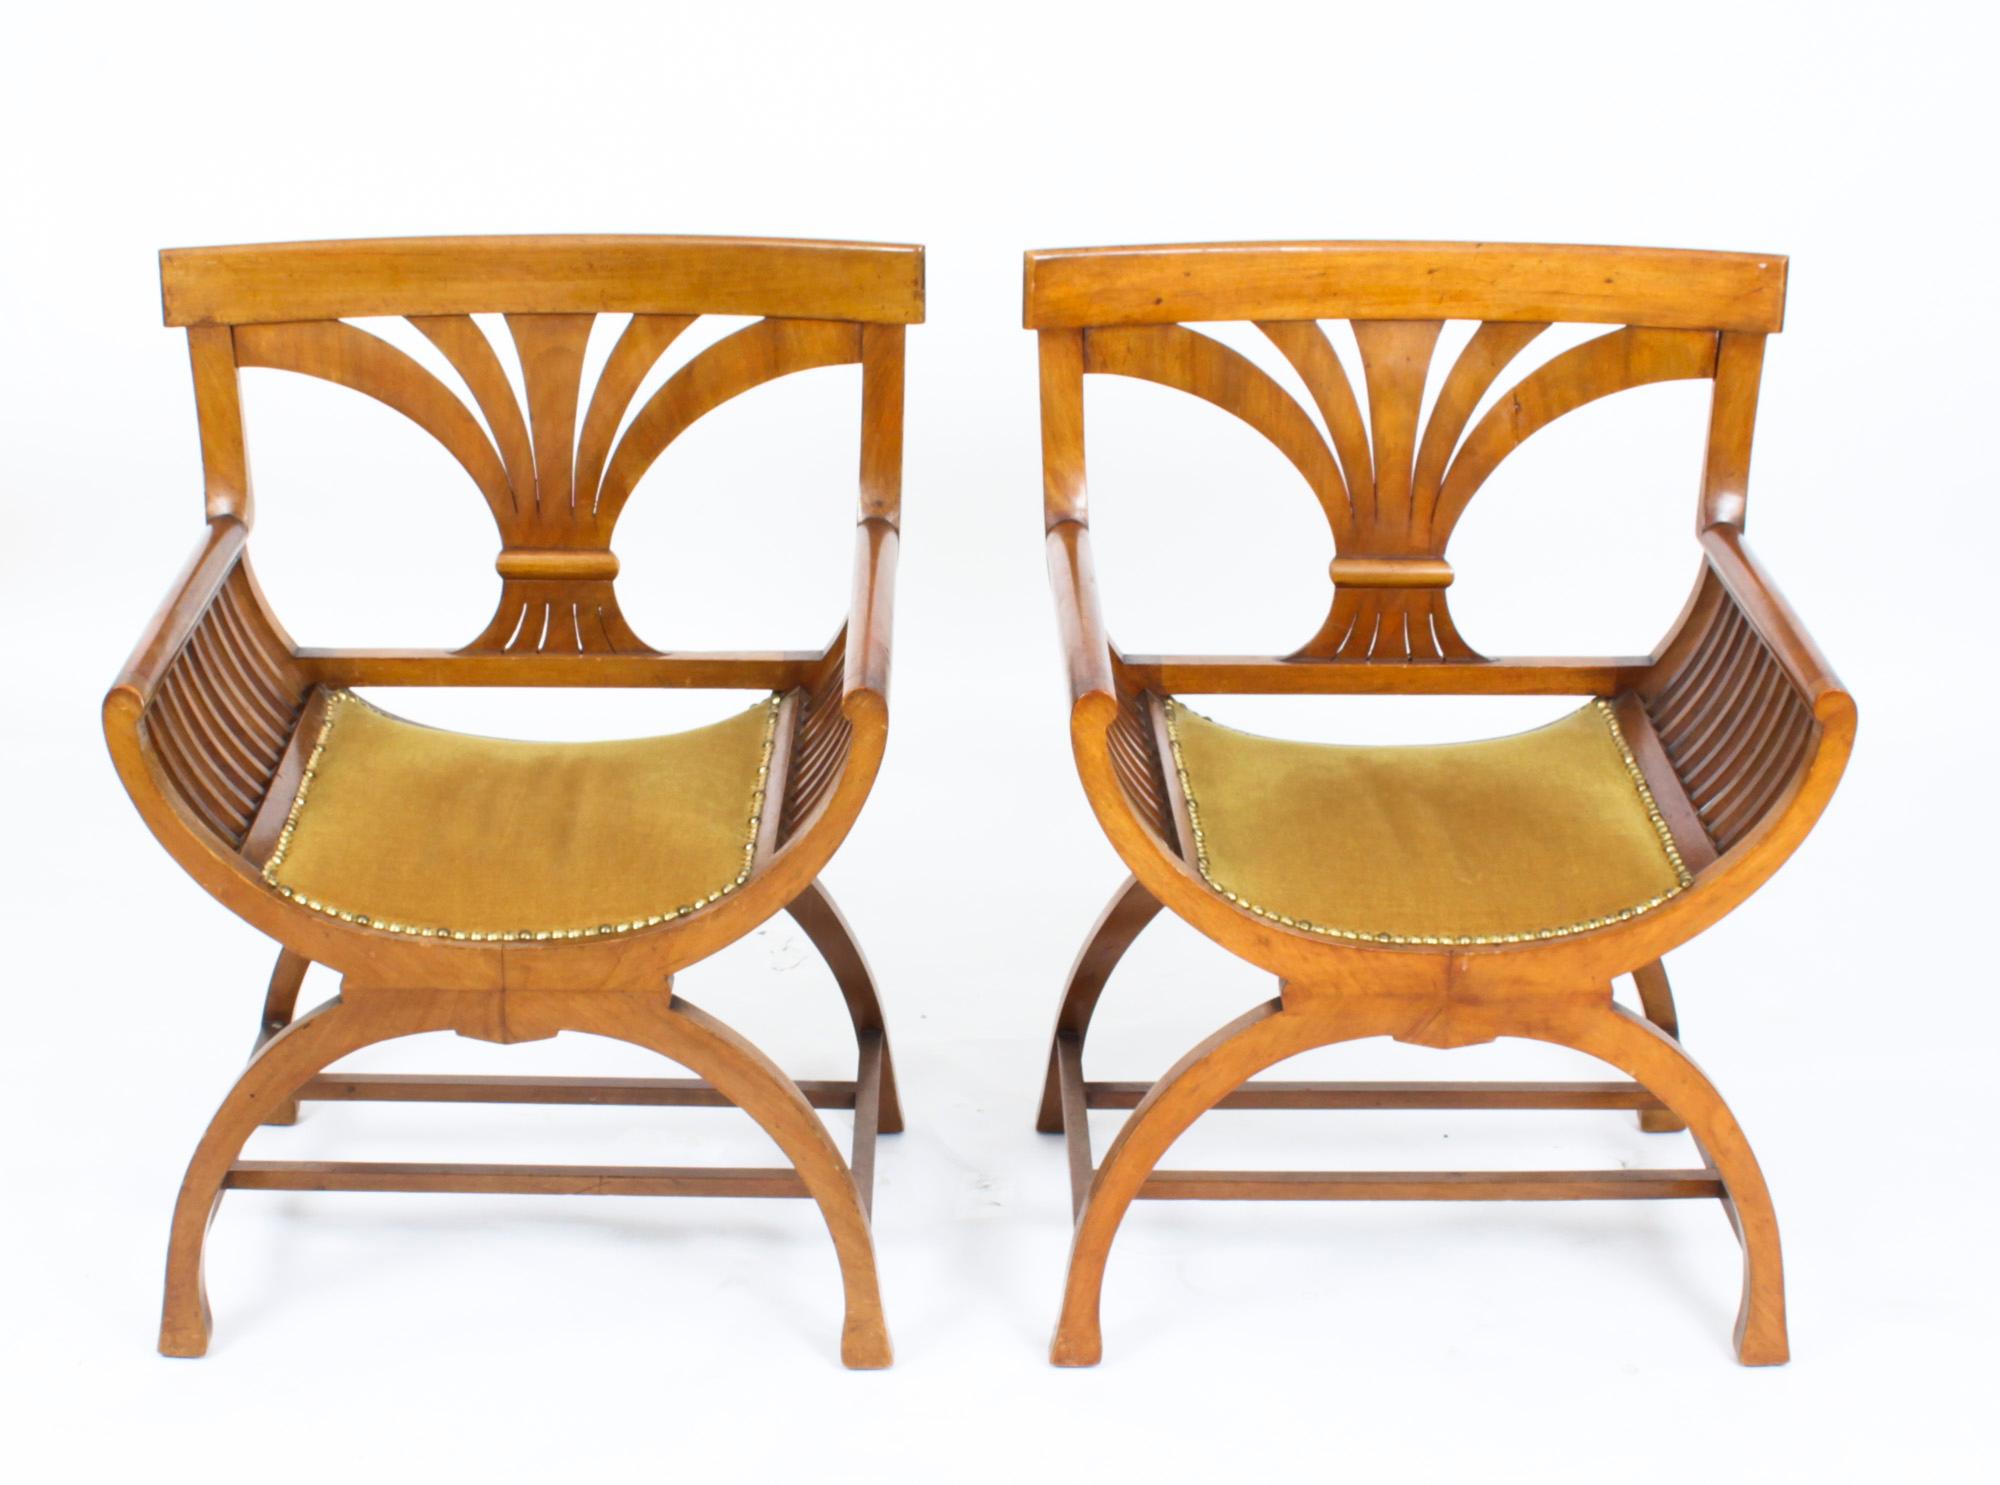 This is a elegant Antique pair of Austrian Biedermeier Walnut 'X' frame armchairs, circa 1830 in date.
 
The chairs are after the model by Josef Danhauserwith and each features a rectangular top rail above open shaped feather splats with scrolled